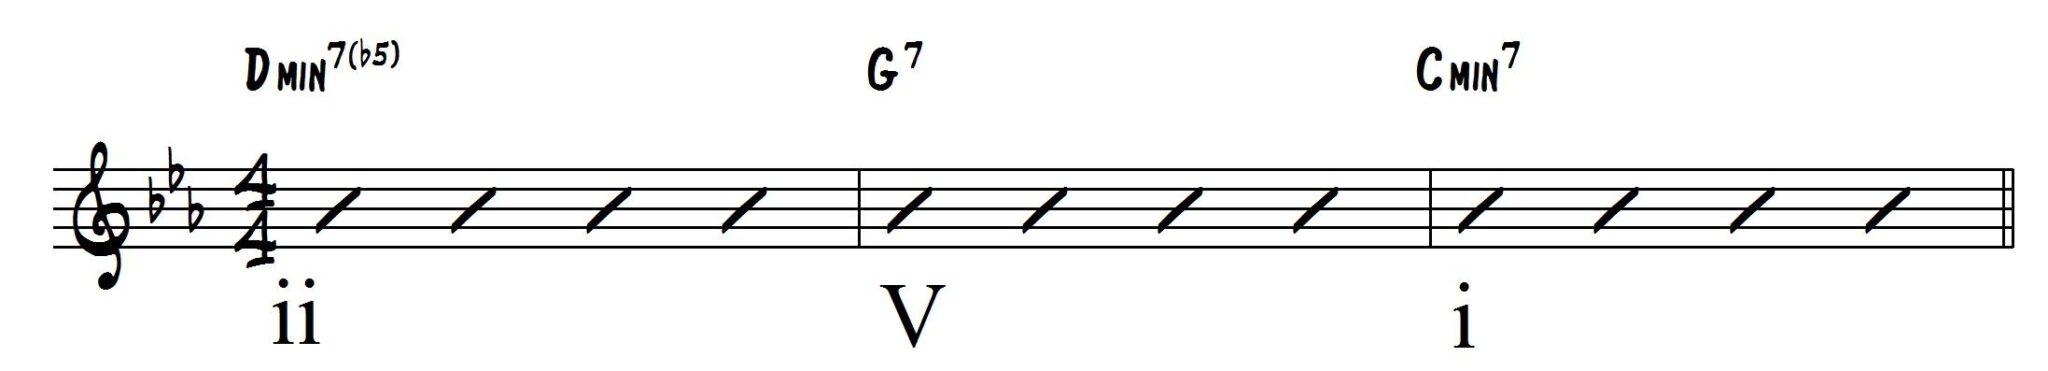 9 Important Jazz Chord Progressions You Need To Master Updated Learn Jazz Standards